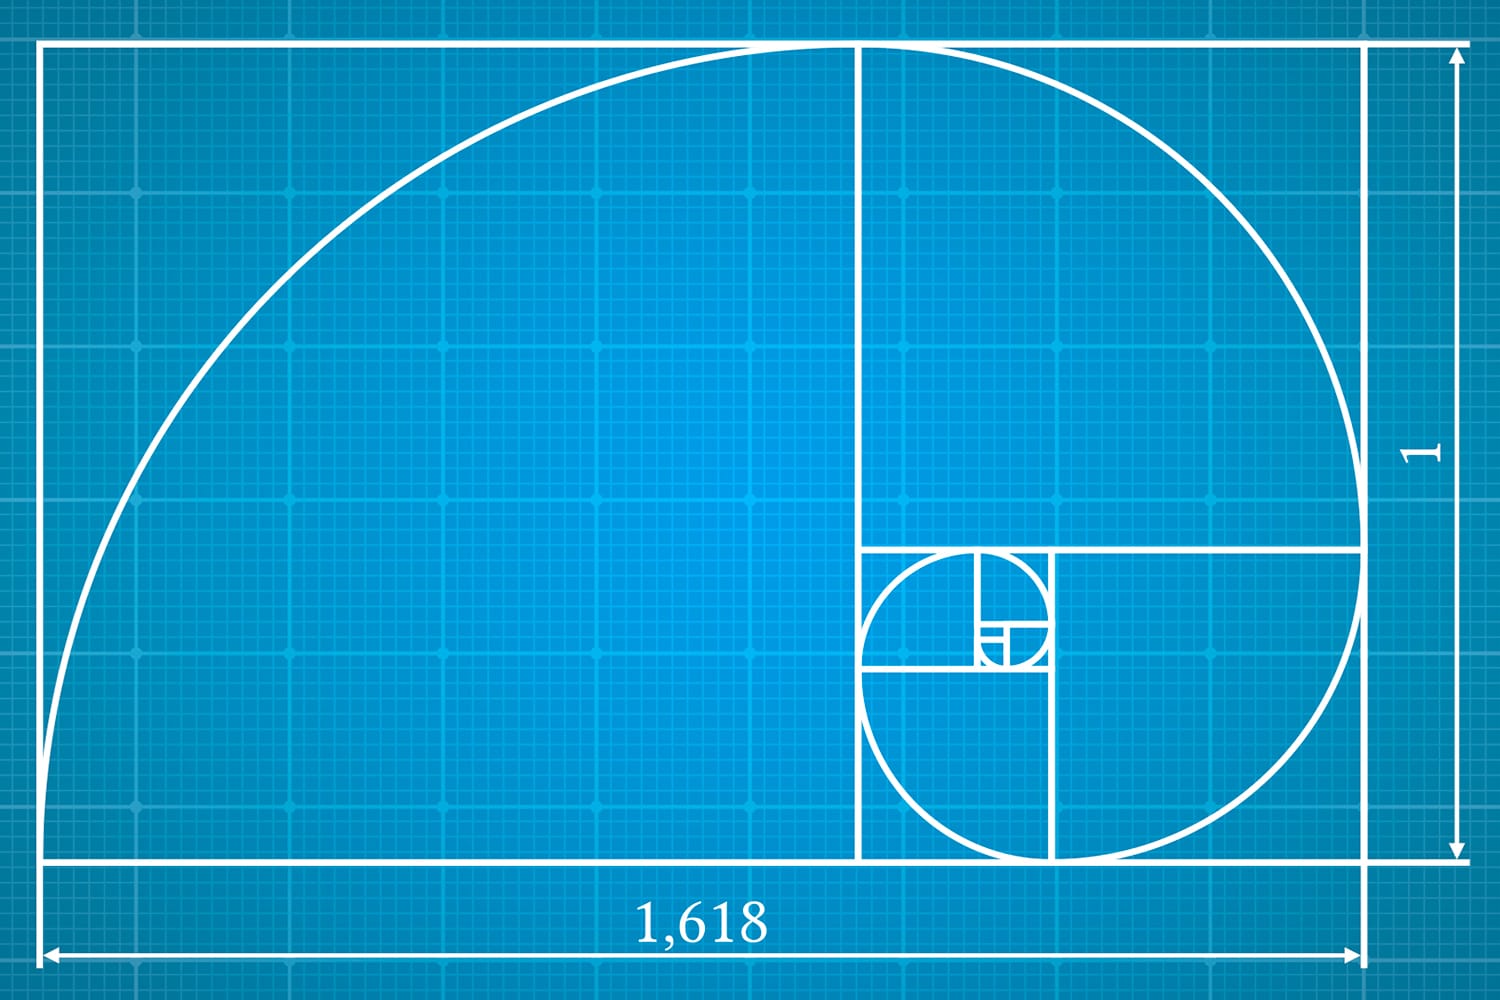 How to Use the Golden Ratio for Better Composition